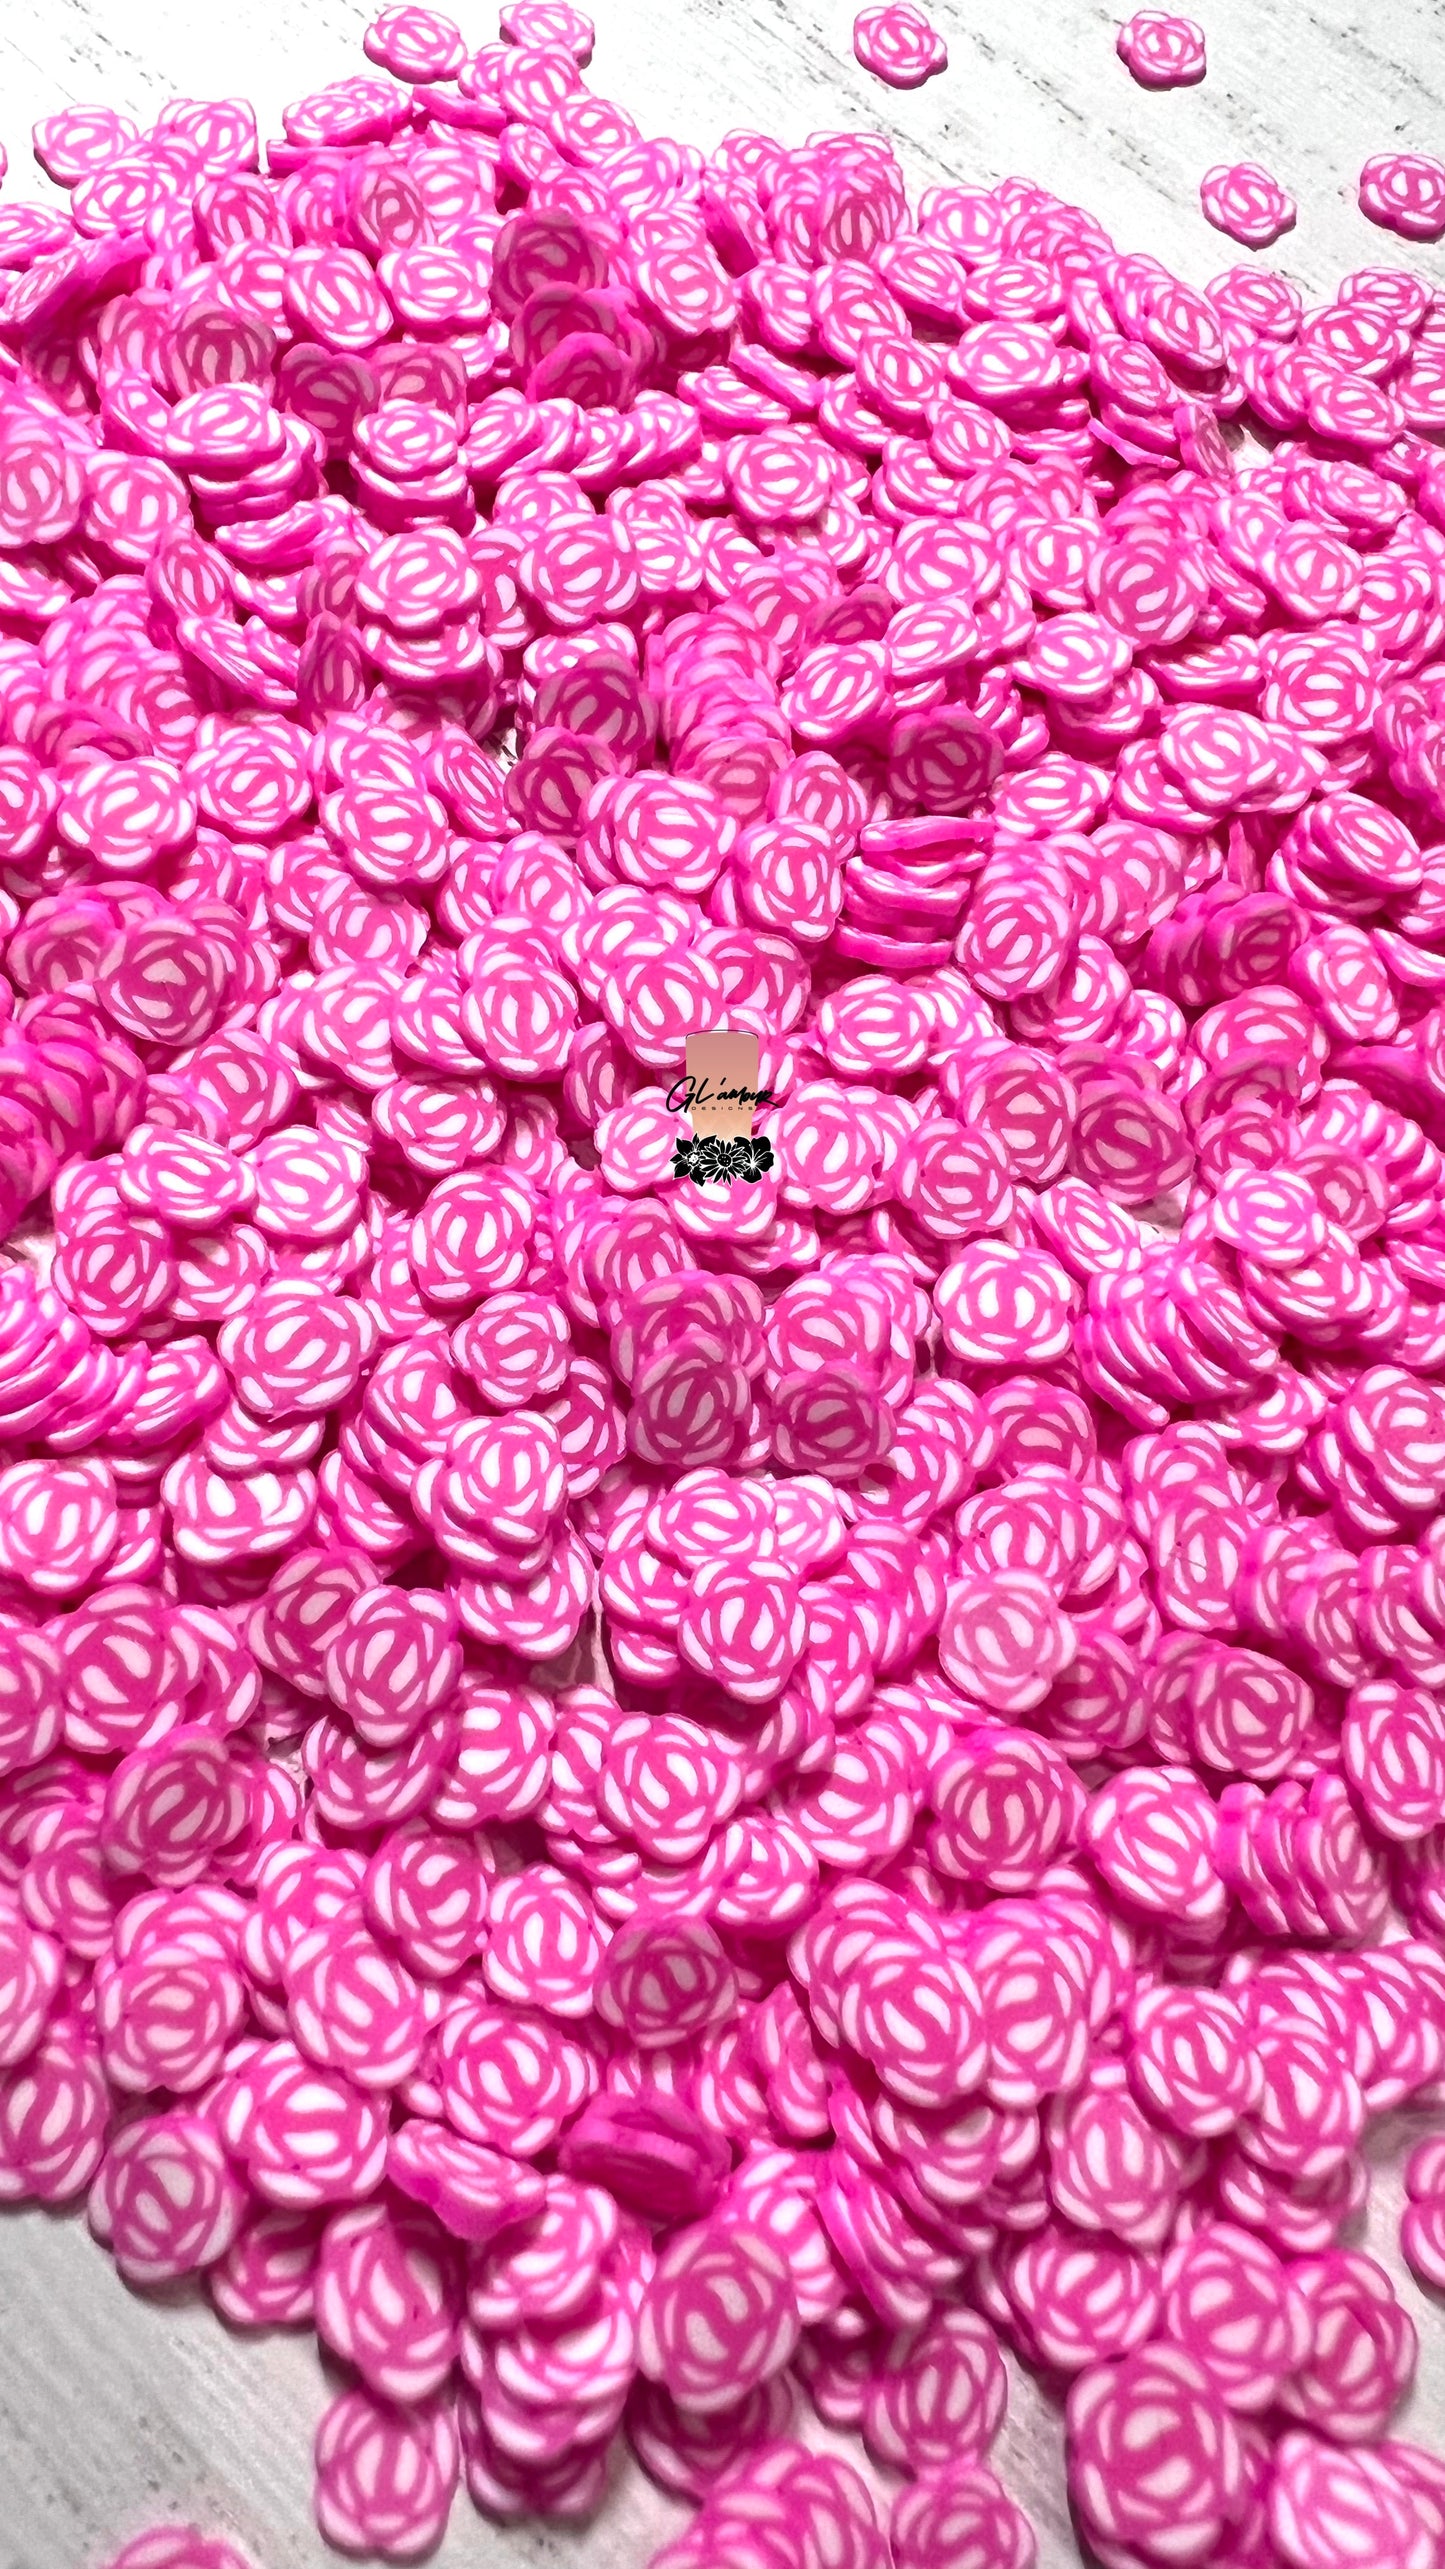 Hot Pink Rose Polymer Slices - 5mm Small